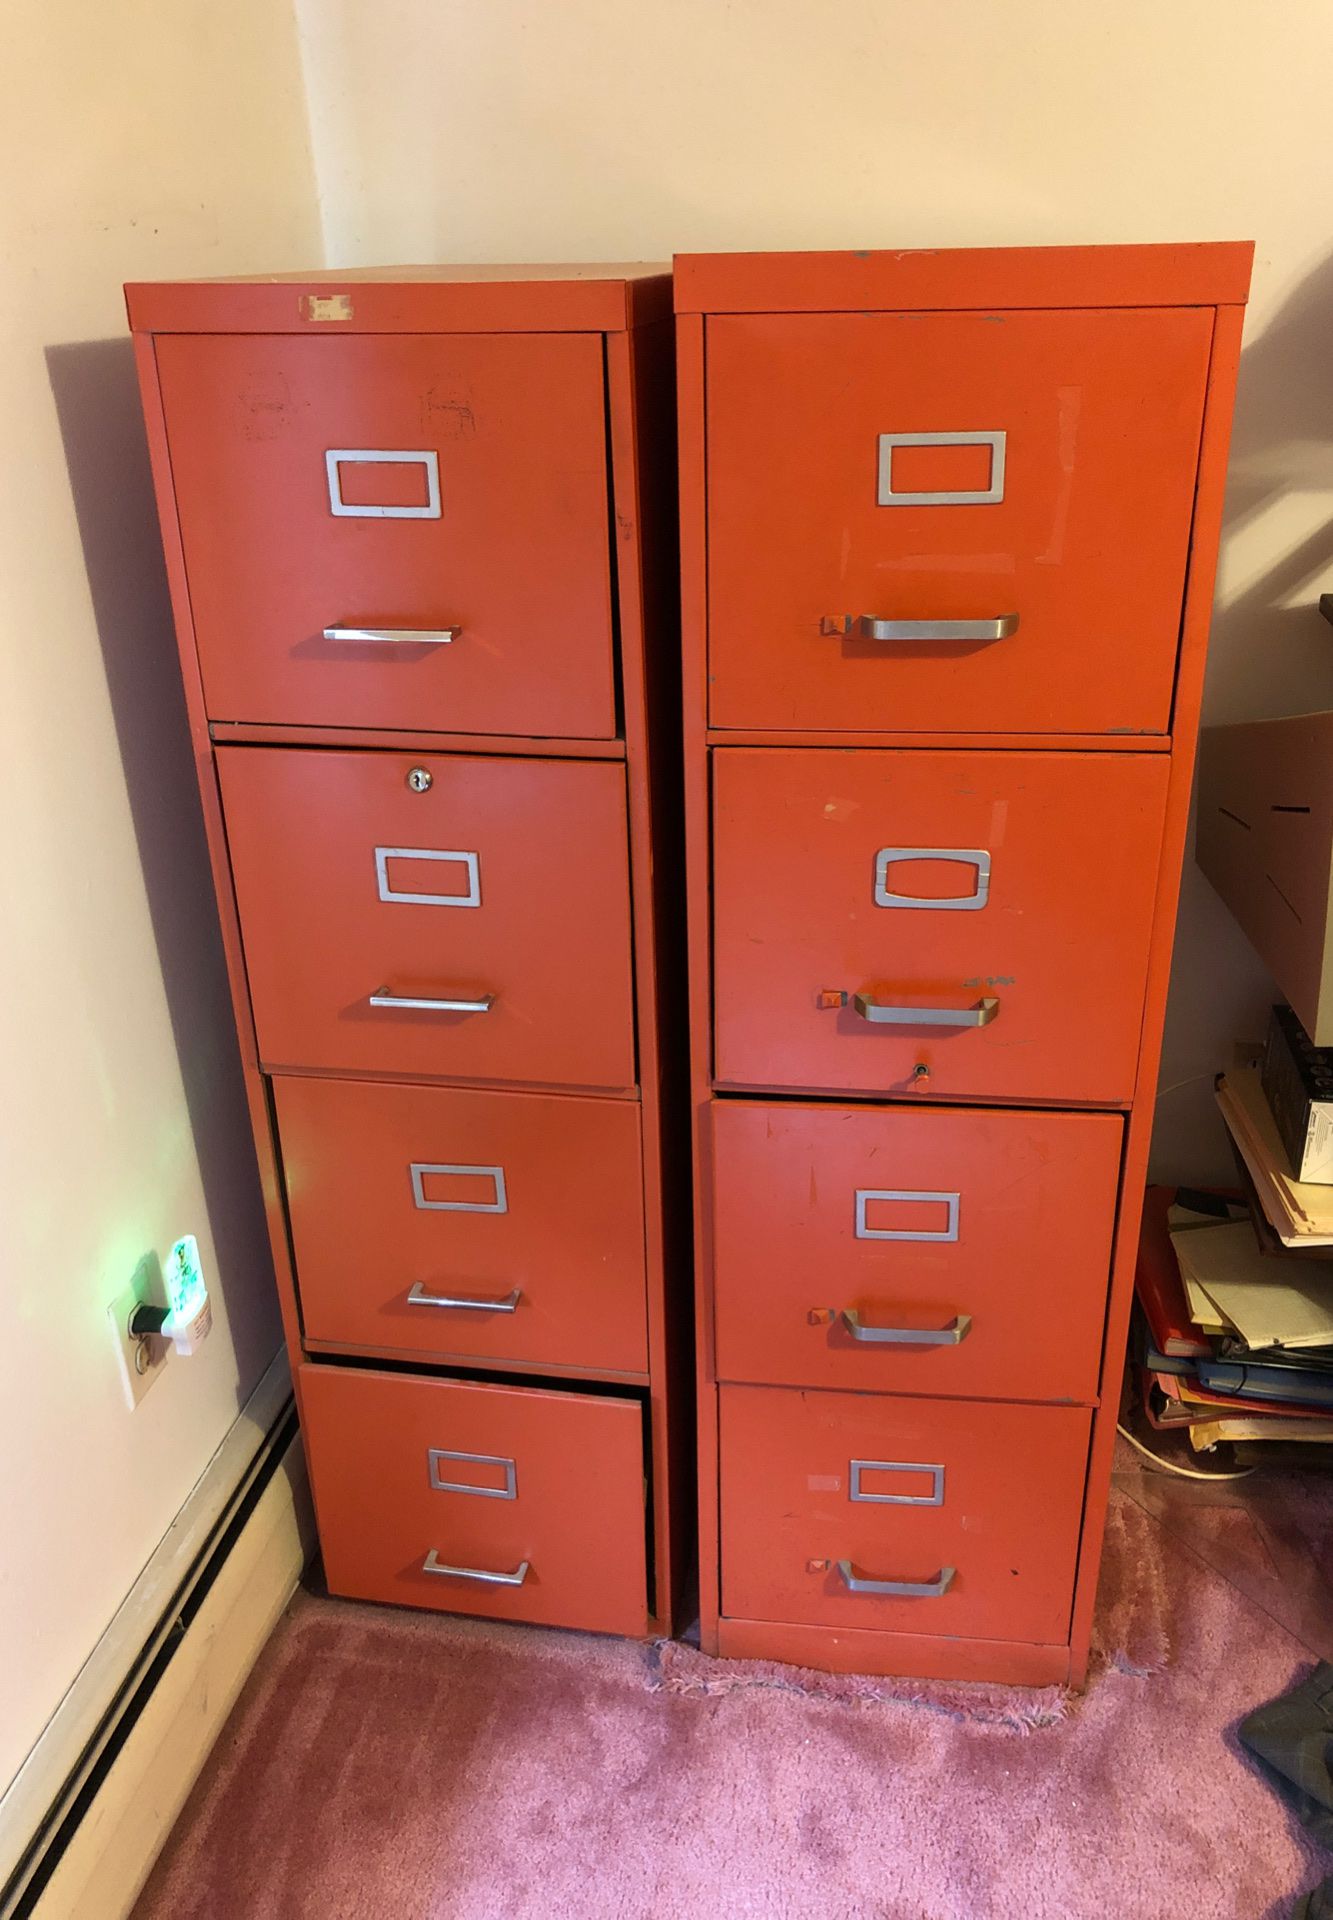 File cabinet with four drawers each